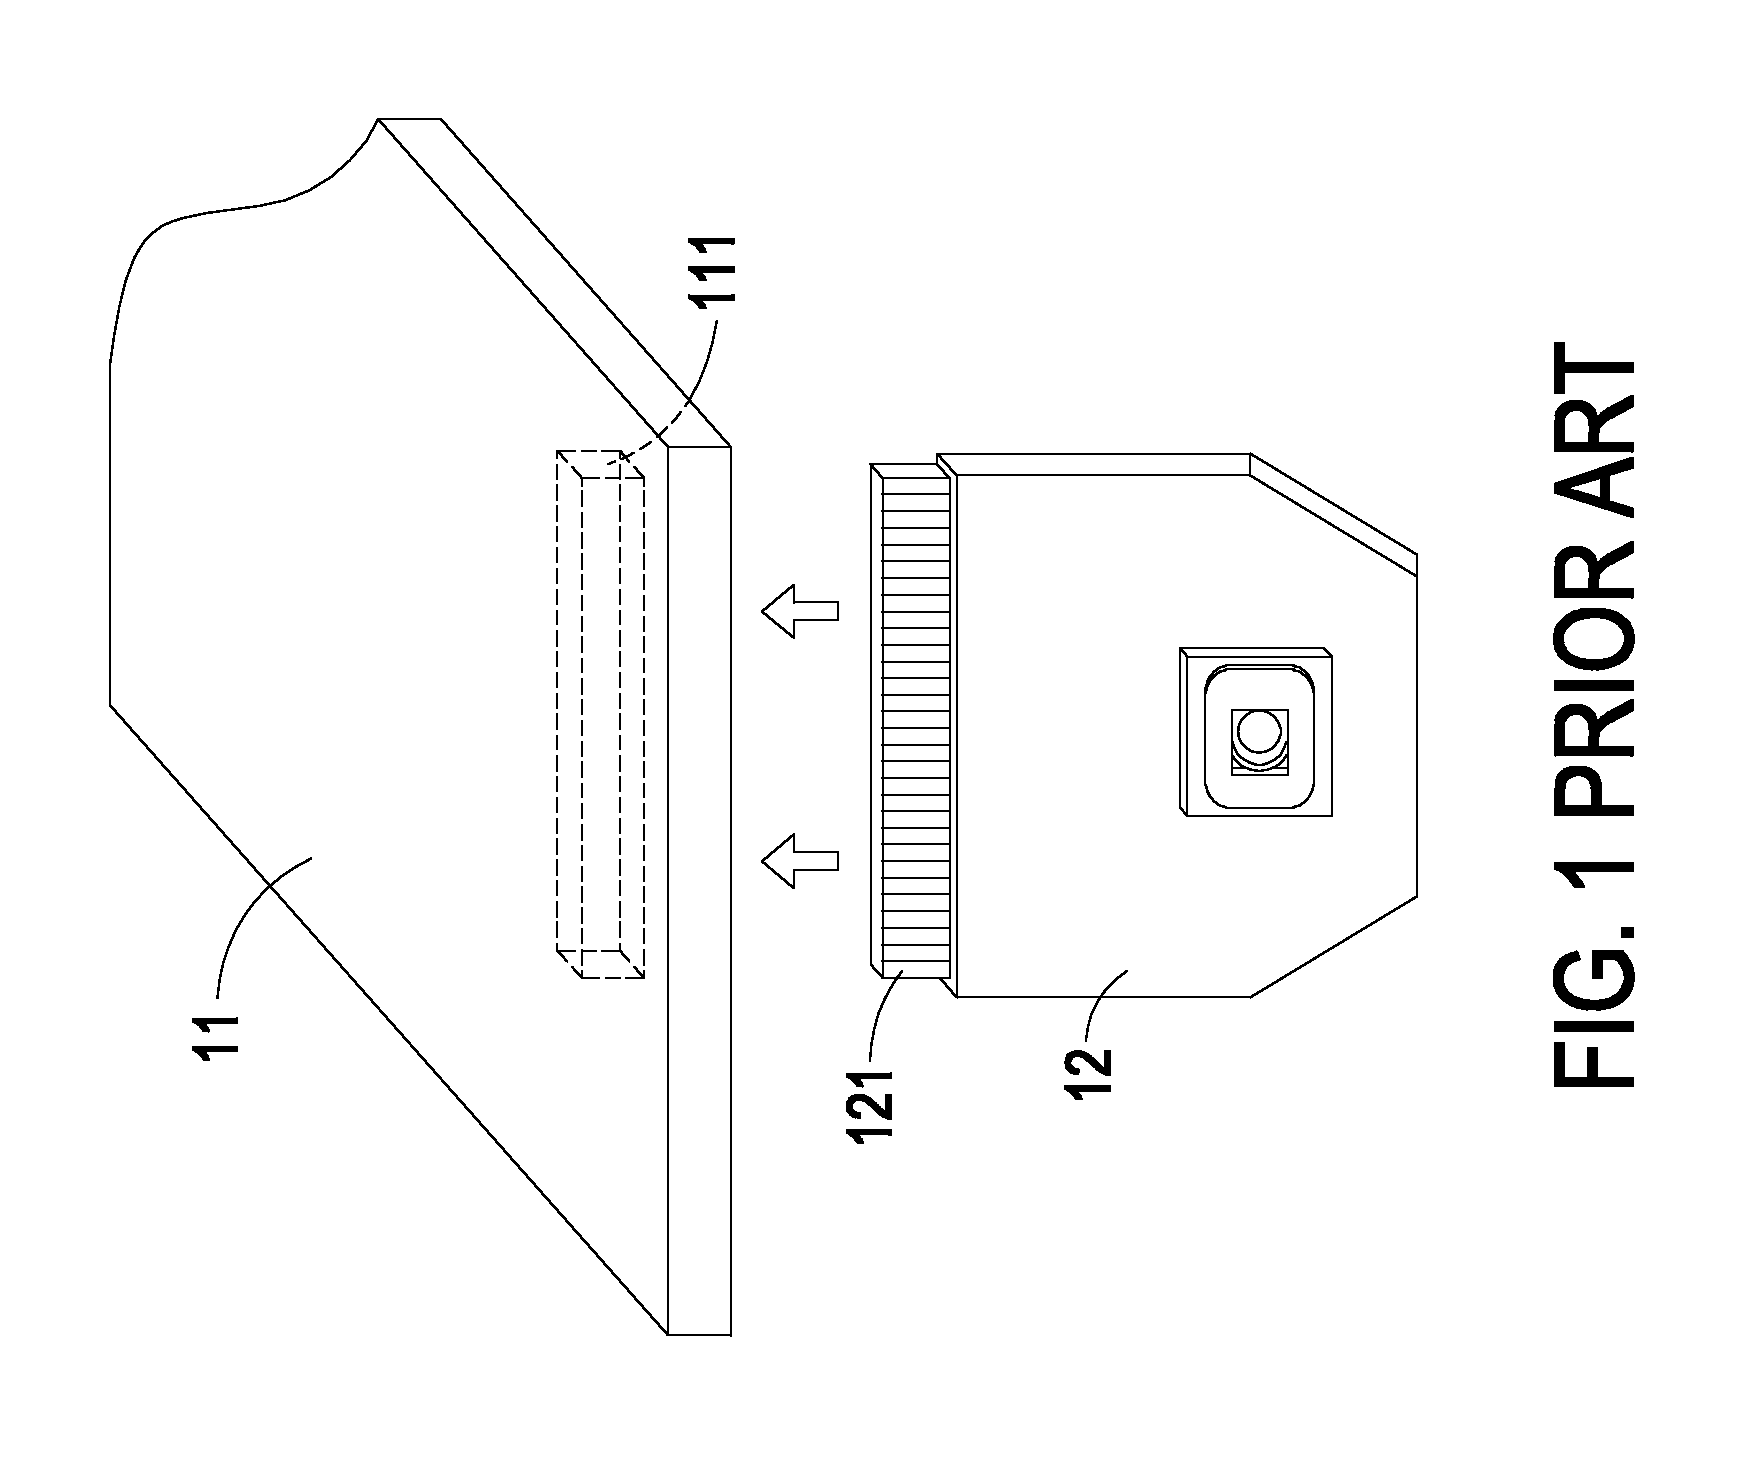 Flexibly connectable digital micromirror device module and projecting apparatus employing same